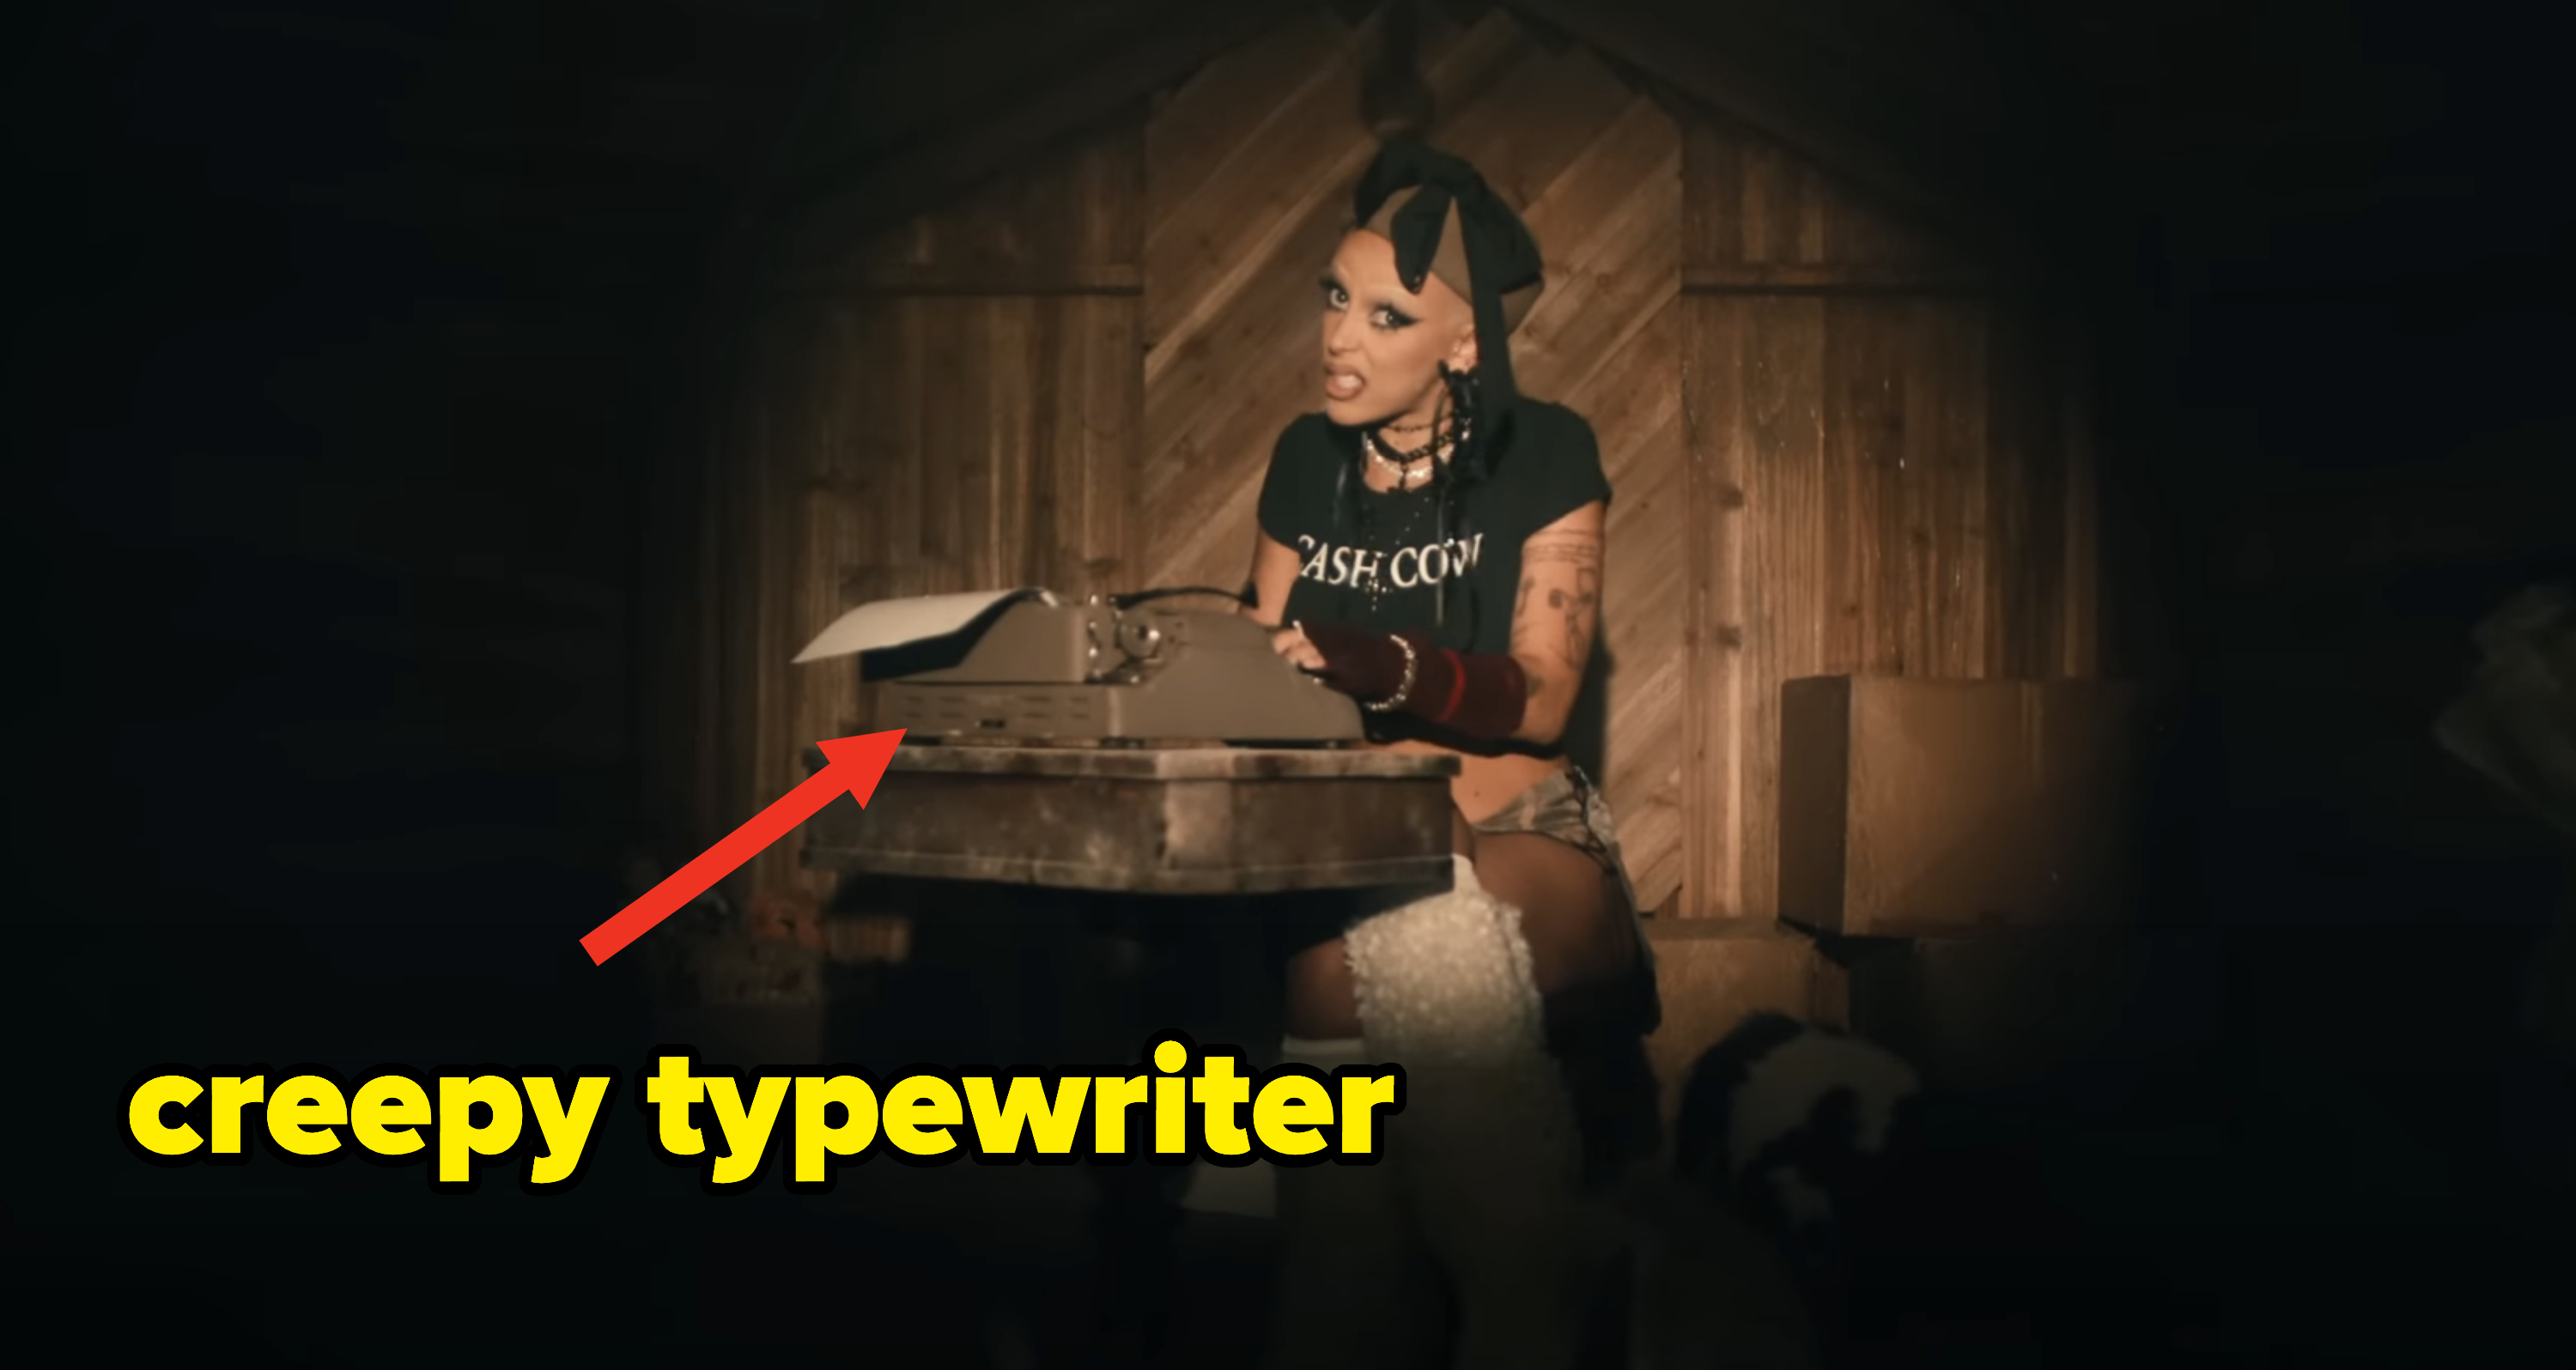 Doja as jack at a typewriter with caption &quot;Creepy typewriter&quot;